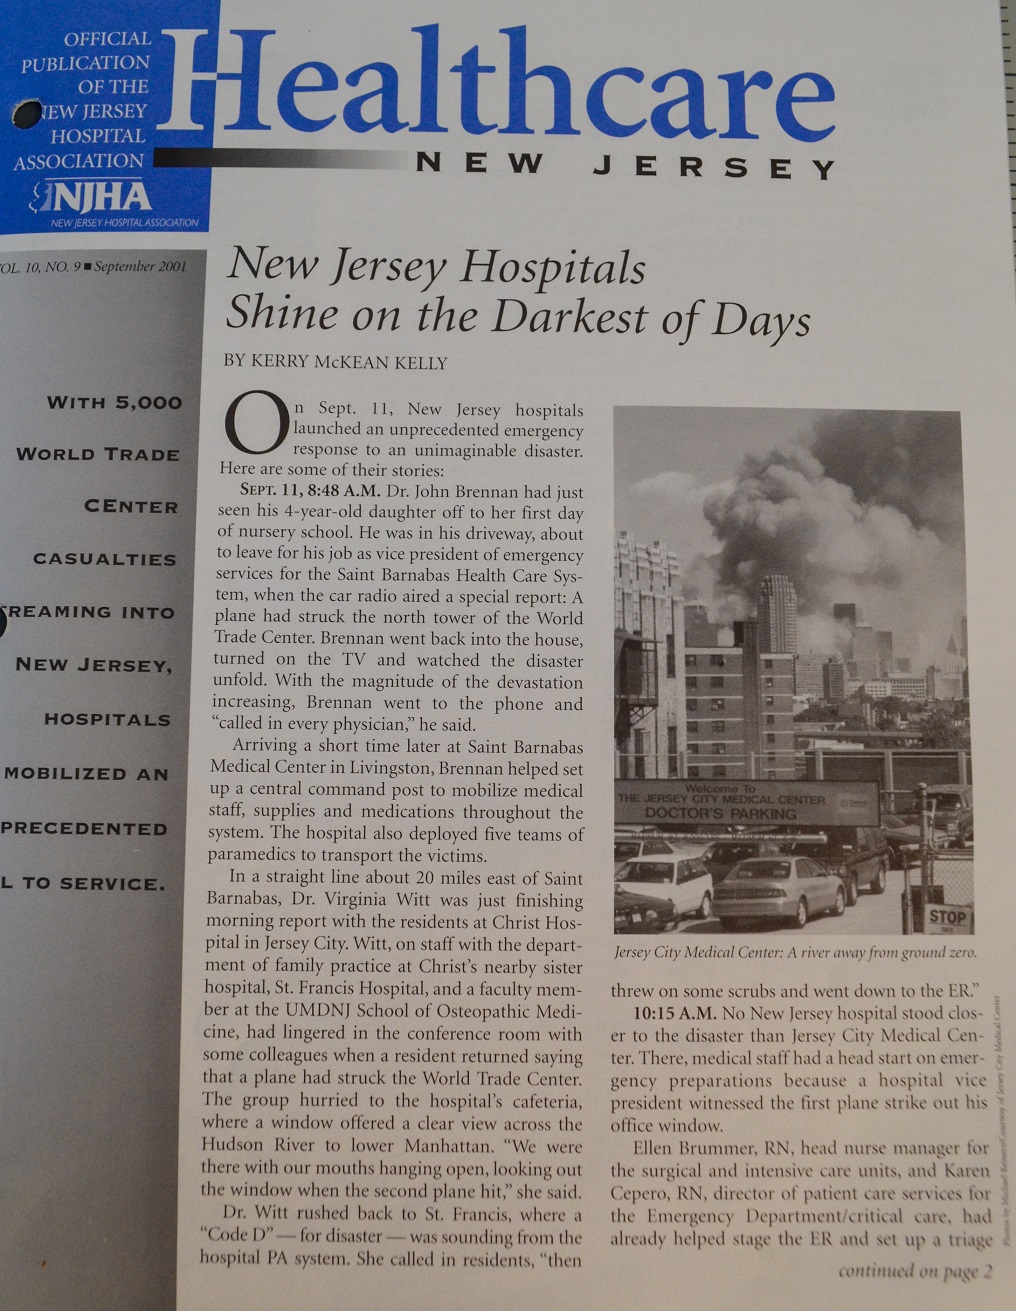 On Sept. 11, 2001, New Jersey’s hospitals leapt into action in response to the terrorist attacks across the Hudson River. Frontline facilities like Jersey City Medical Center and Christ Hospital in Jersey City tended to the wounded, while the NJHA staff helped create a hotline for families to call in search of New Jersey victims. After the initial response, NJHA created a dedicated Emergency Preparedness department, which has created best-practices for emergencies ranging from Hurricane Sandy to Ebola.